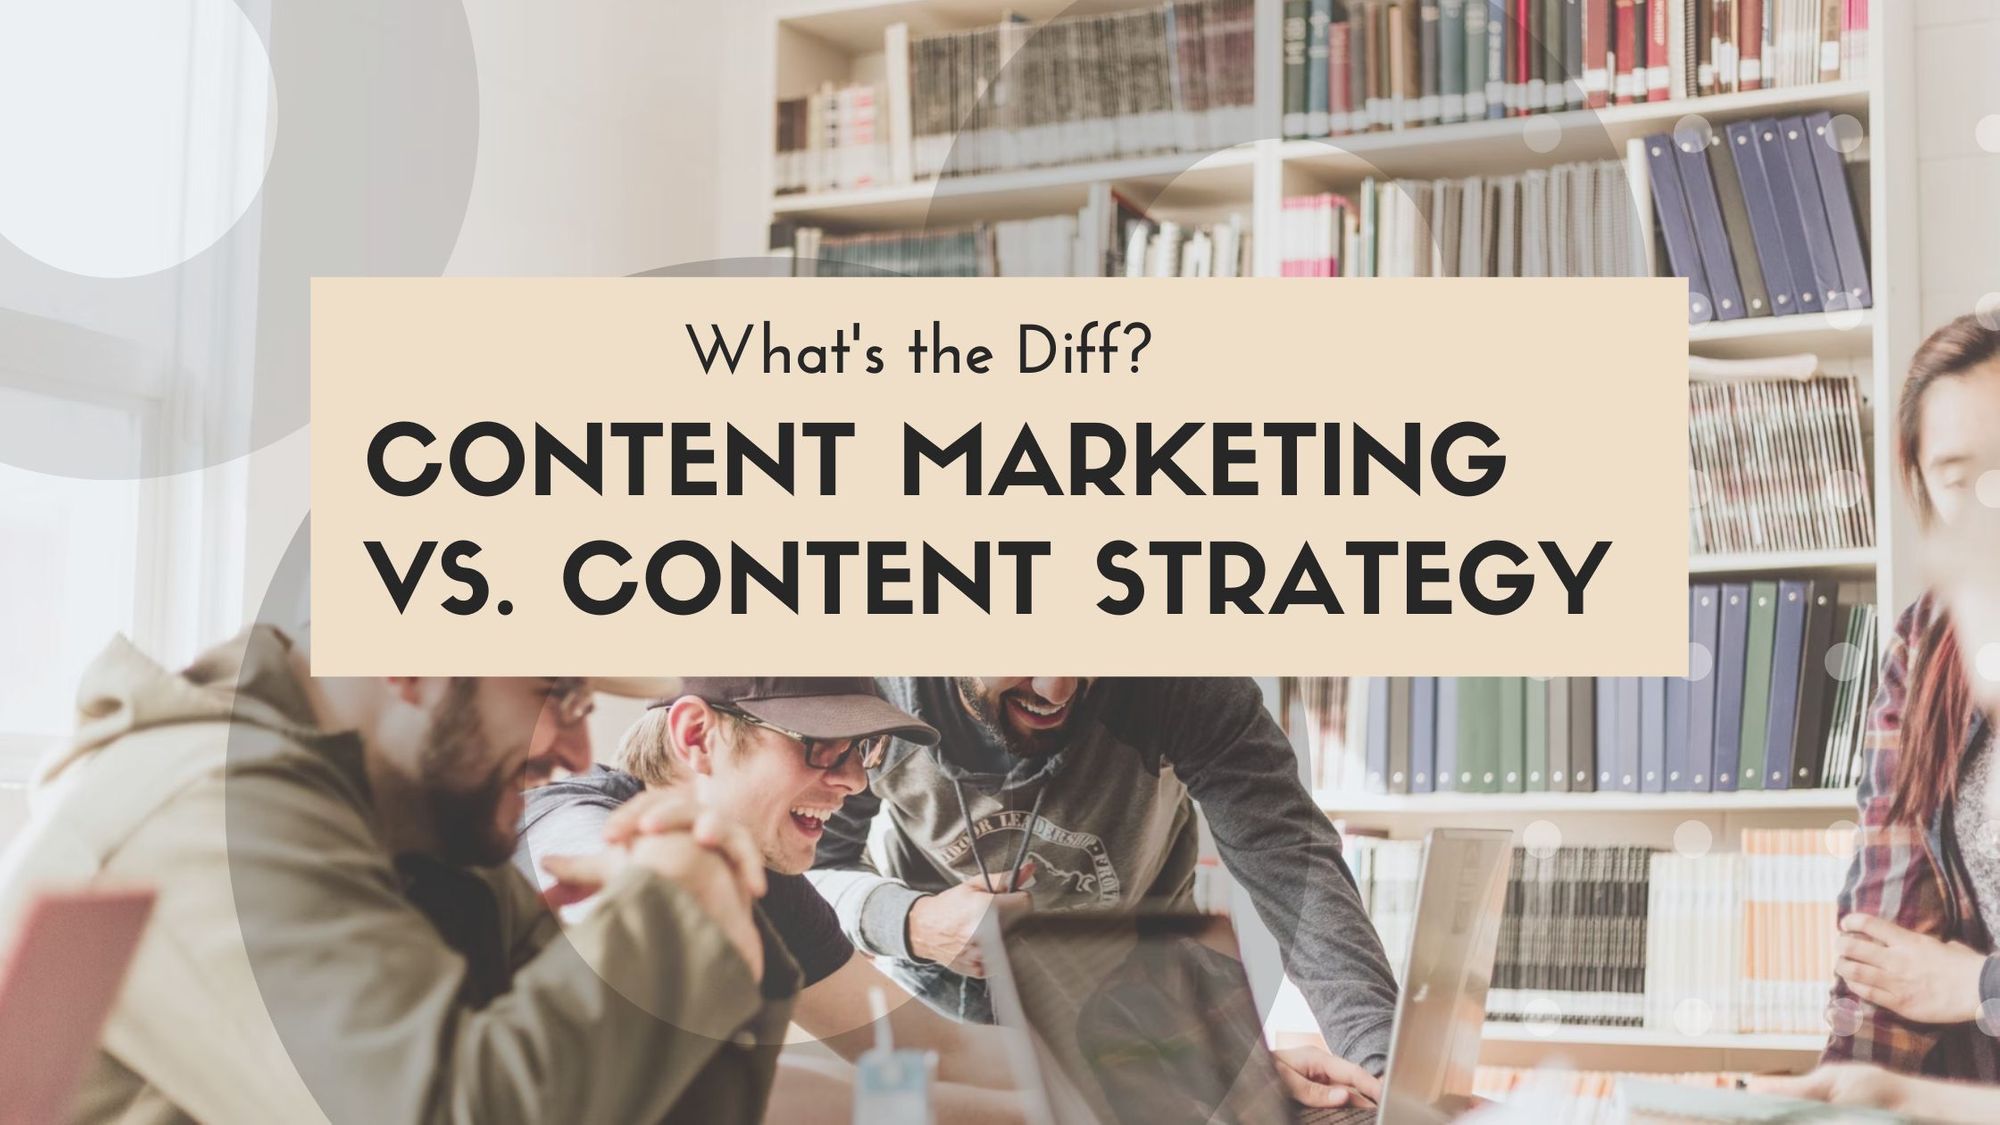 Content Marketing vs. Content Strategy: What's the Diff?